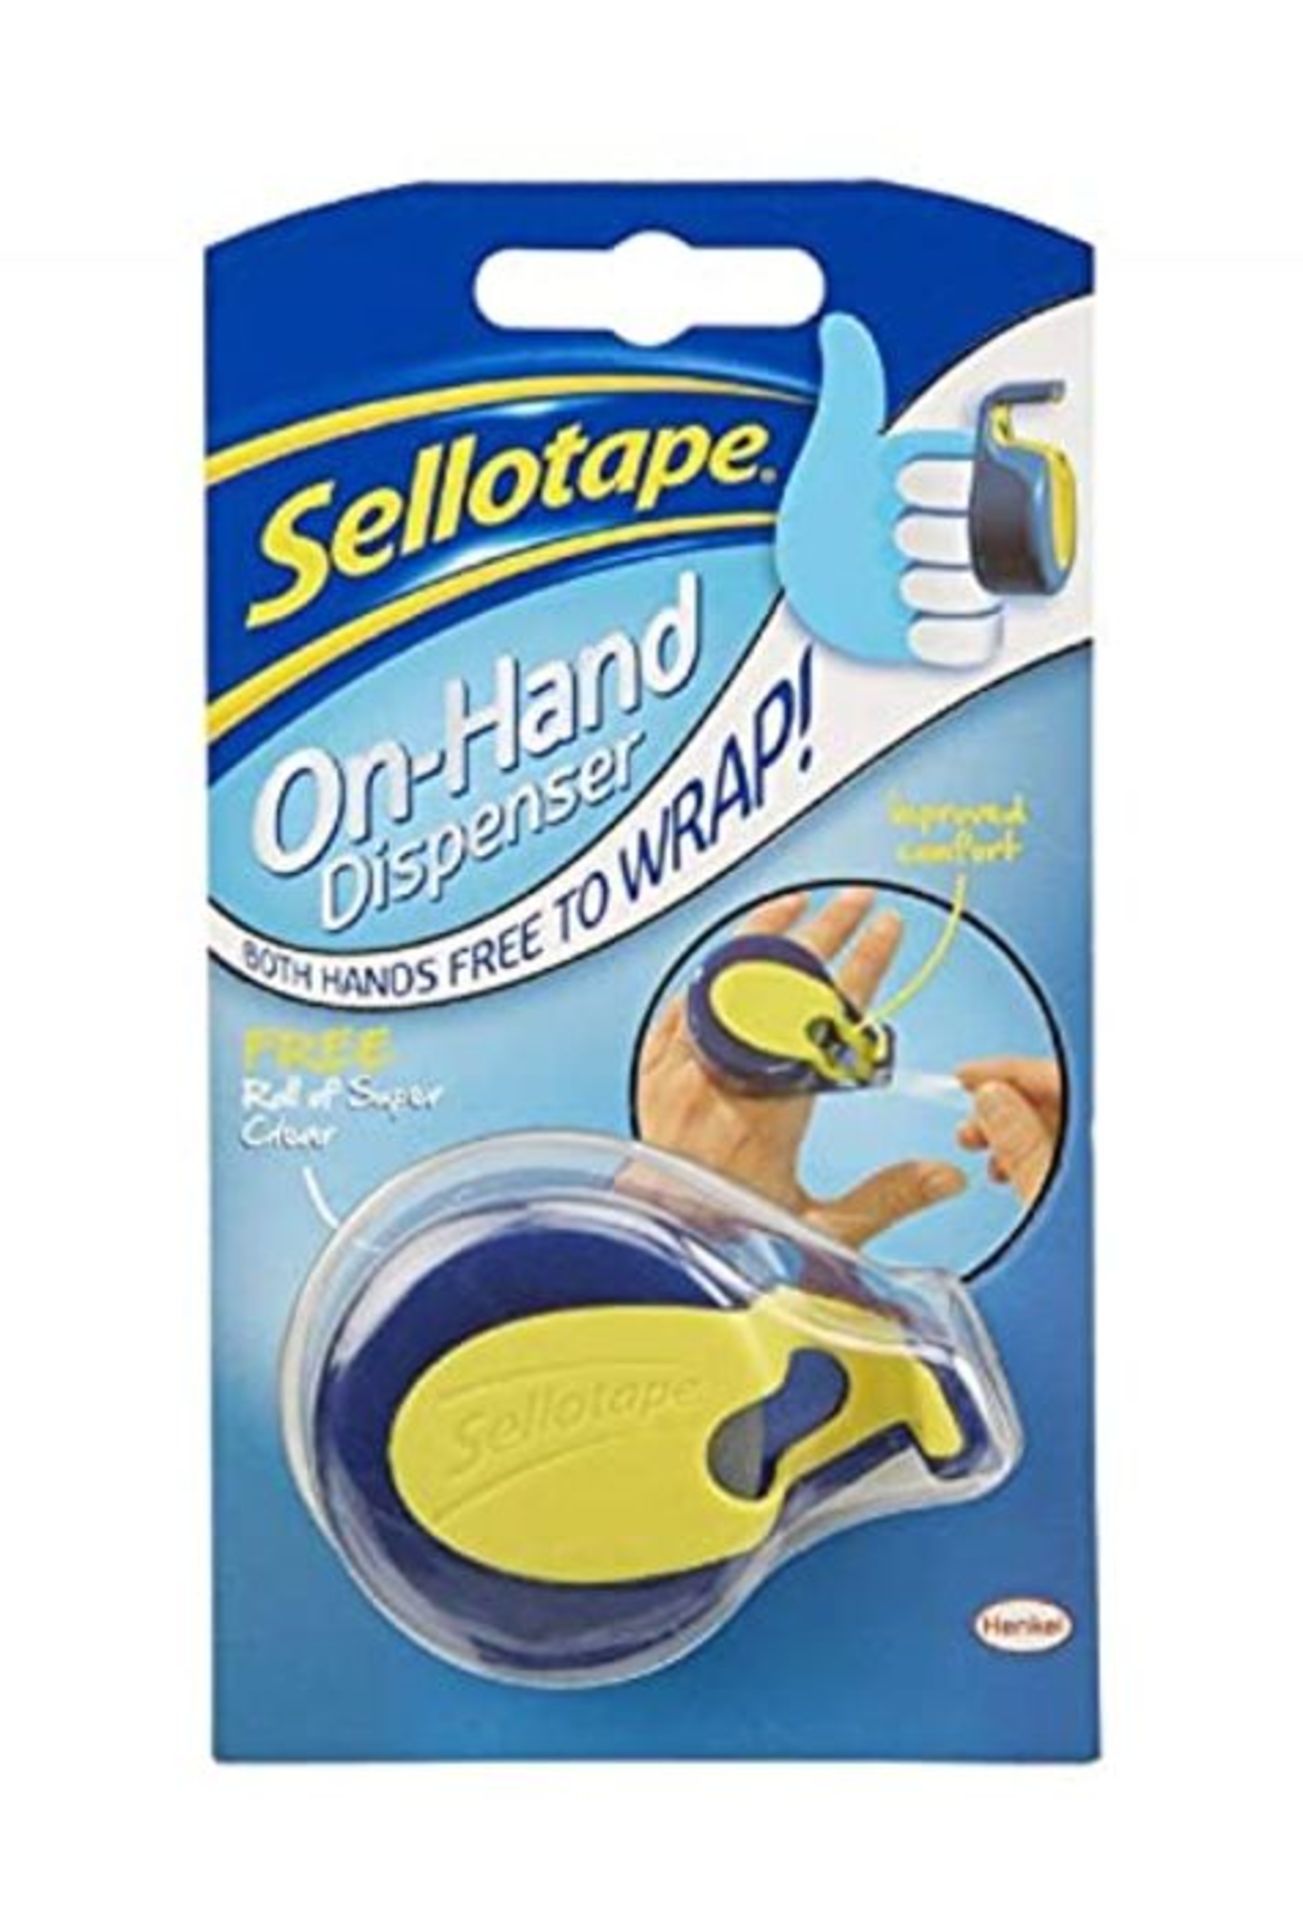 Sellotape On-Hand Dispenser for sticky tape / Both hands free for crafting and wrappin